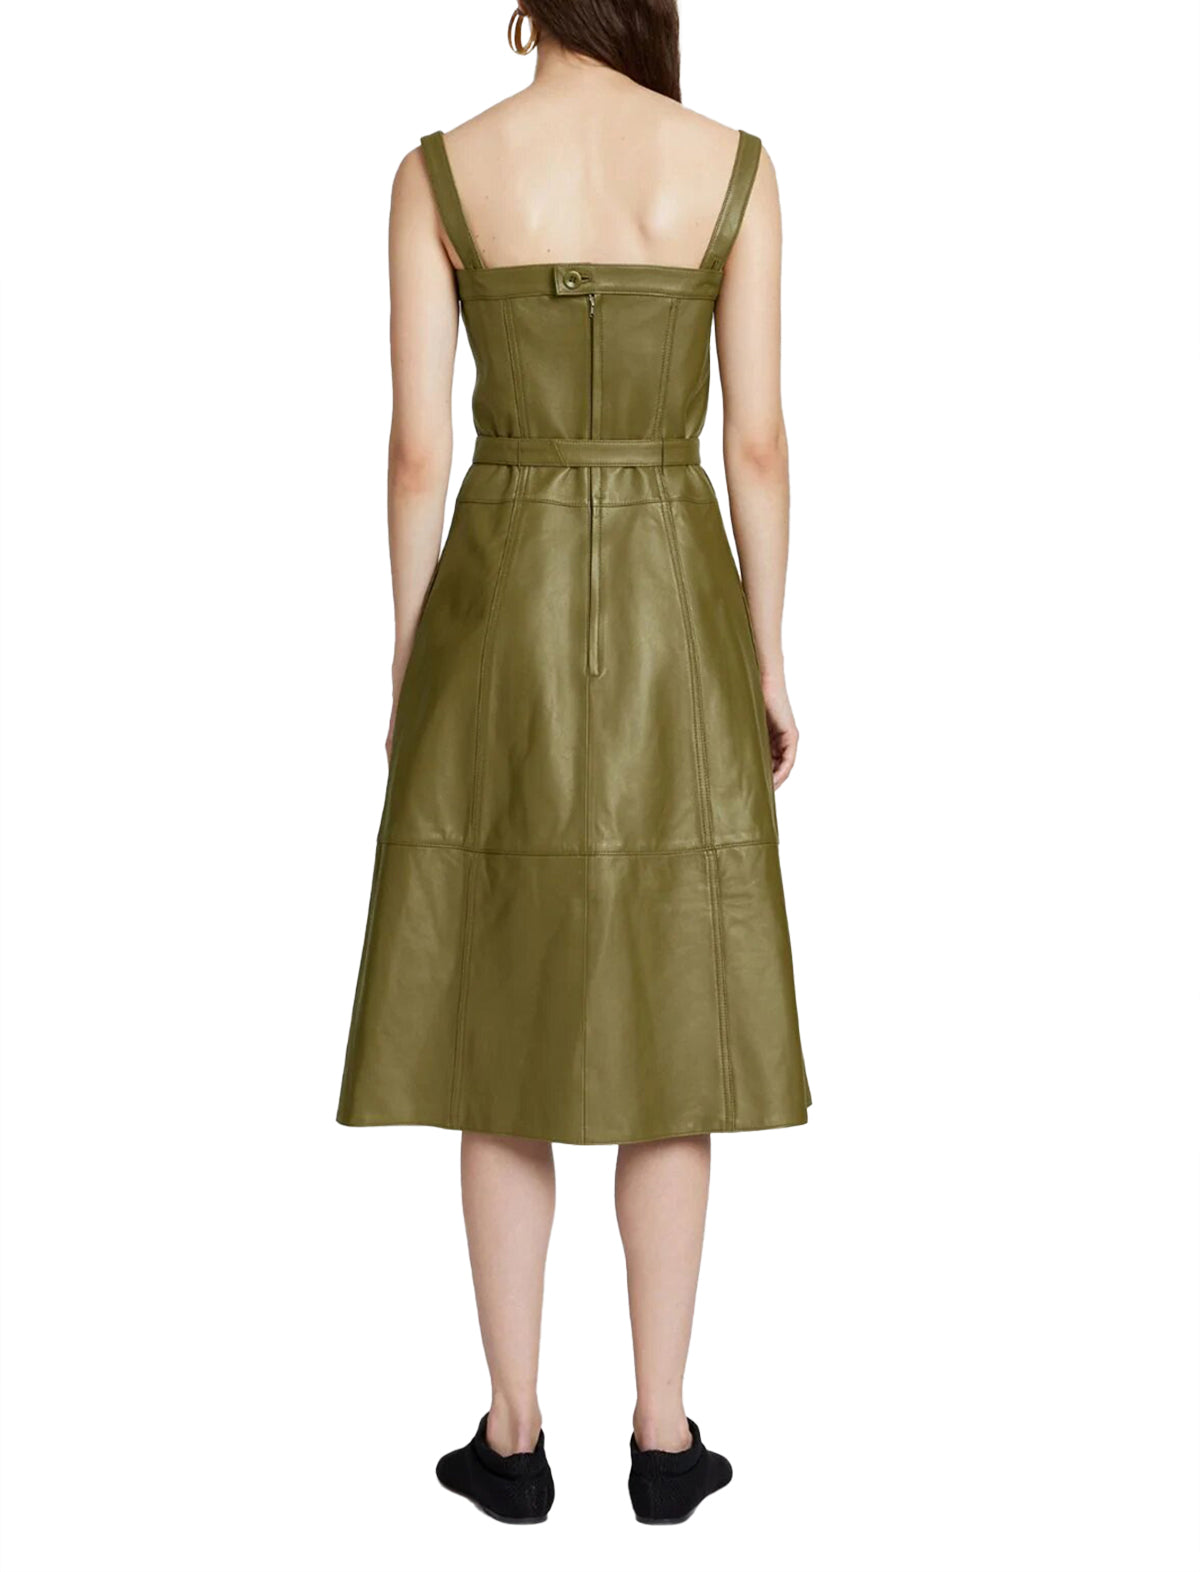 PROENZA SCHOULER WHITE LABEL Leather Belted Dress in Military